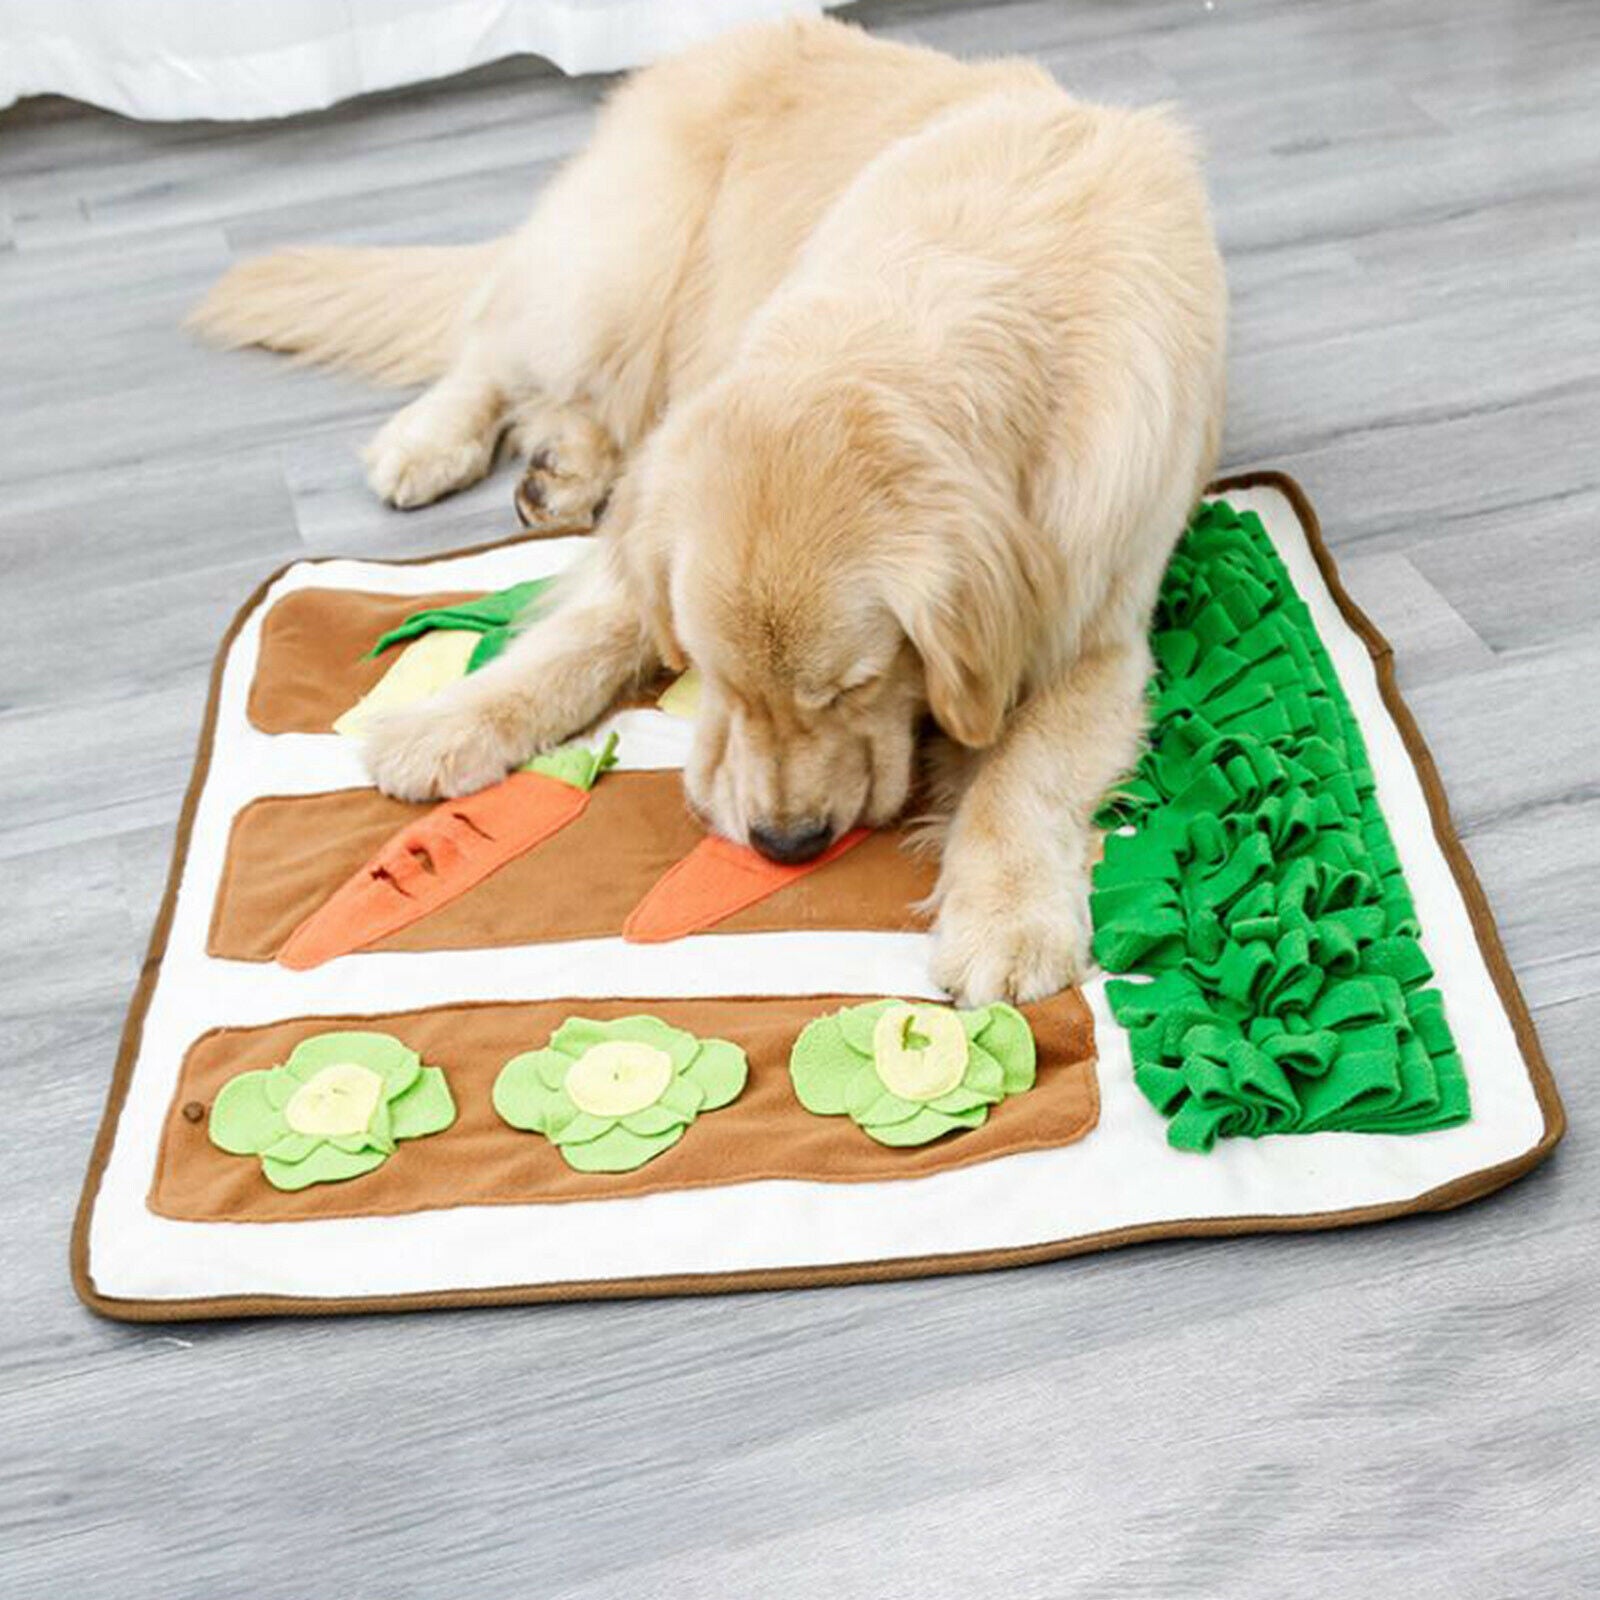 Dog Snuffle Mat Toys Feeder Animals Cats Puppy Bowl Travel Use Stress Relief